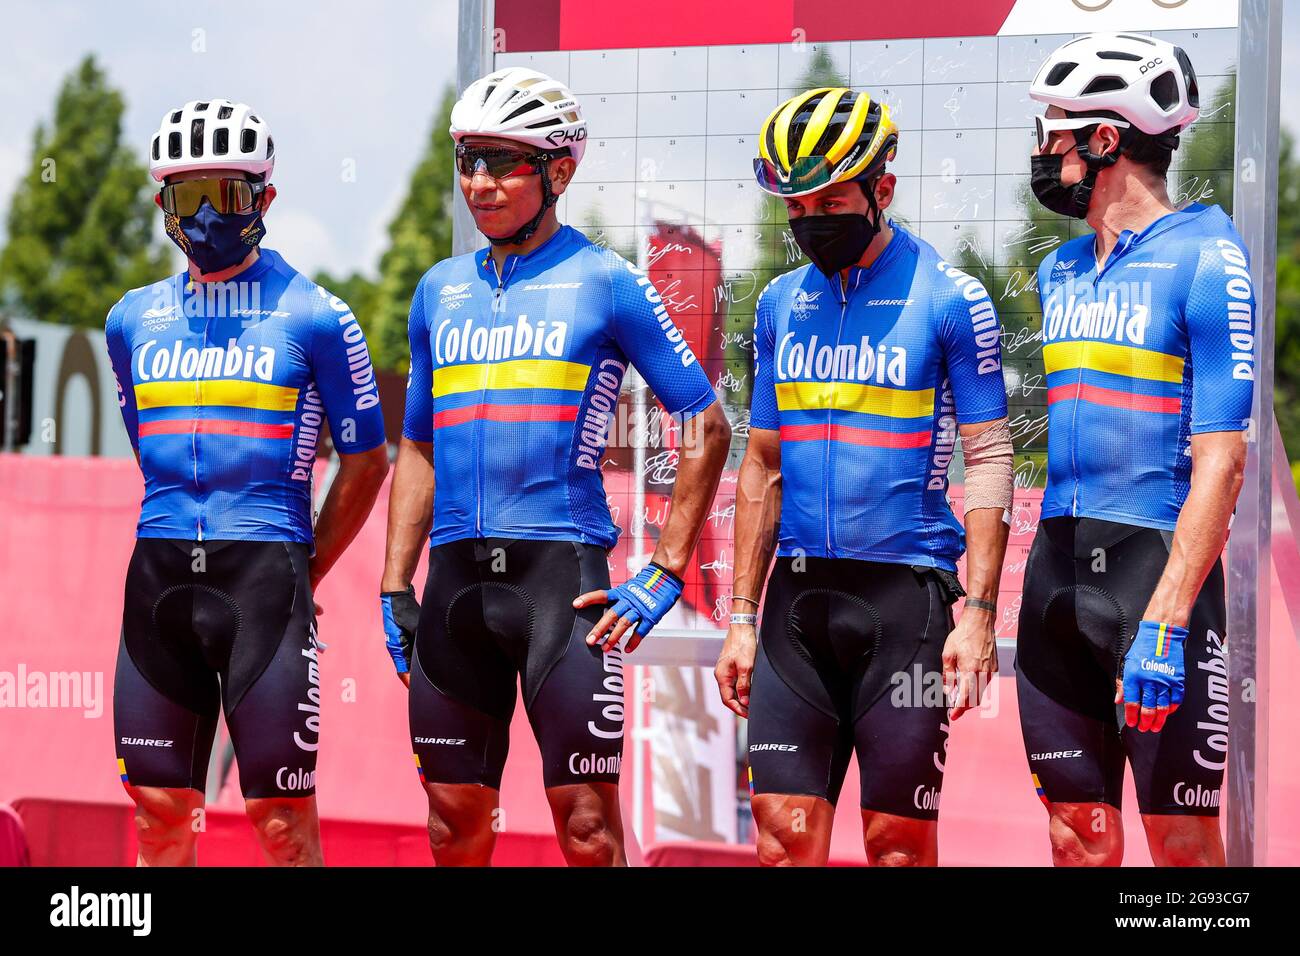 Tokyo, Japan. 24th July, 2021. TOKYO, JAPAN - JULY 24: Sergio Andres Higuita Garcia, Nairo Quintana, Jhoan Esteban Chaves Rubio and Rigoberto Uran of Team Colombia competing on Men's Road Race during the Tokyo 2020 Olympic Games at the Fuji International Speedway on July 24, 2021 in Tokyo, Japan (Photo by Pim Waslander/Orange Pictures) NOCNSF Credit: Orange Pics BV/Alamy Live News Stock Photo